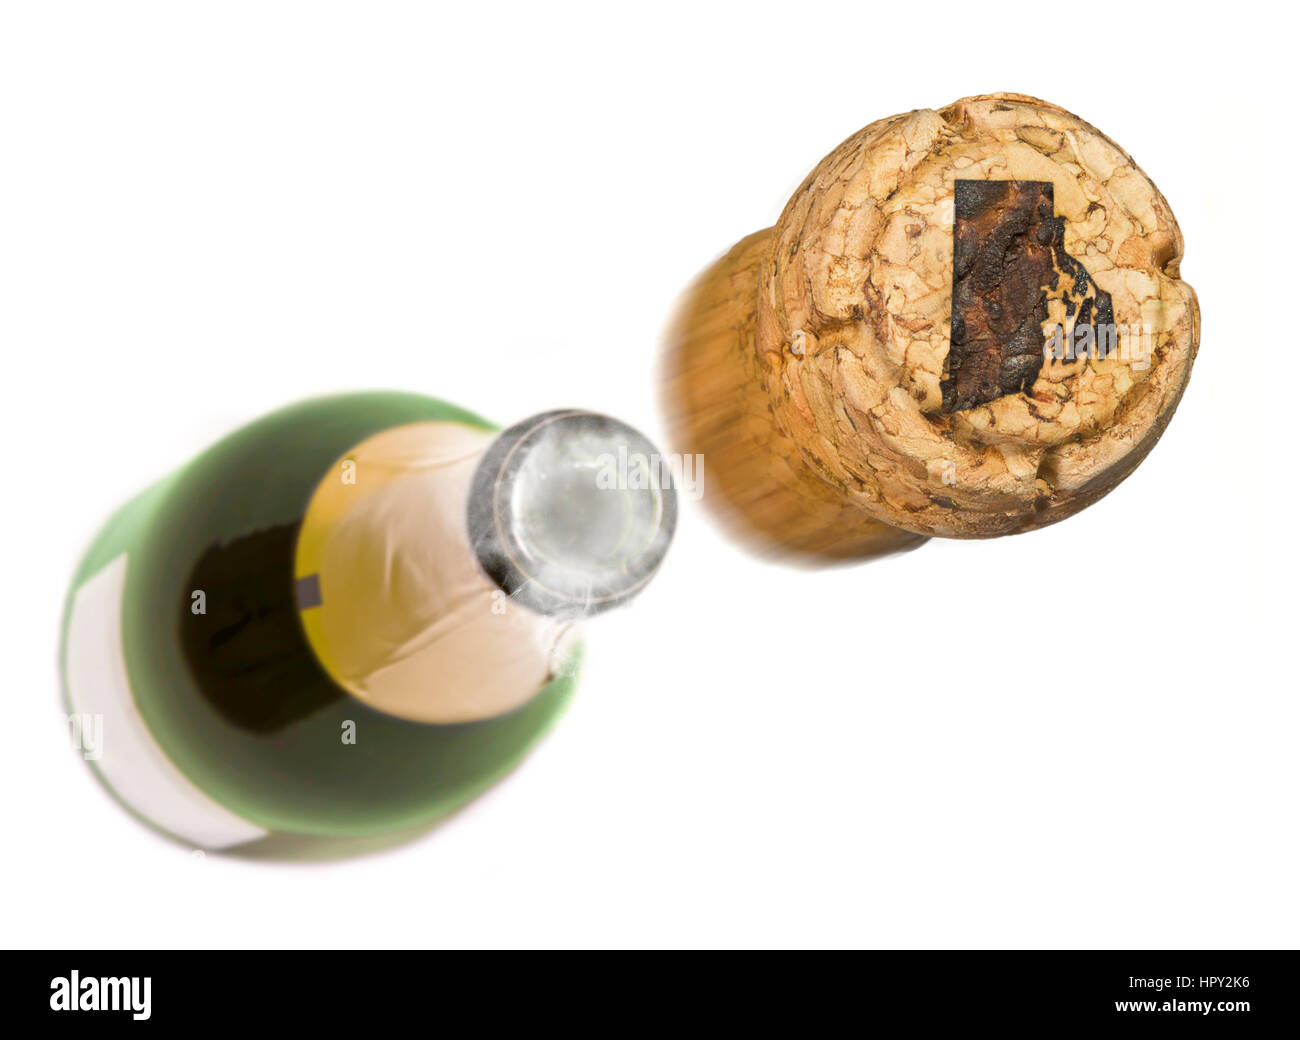 Champagne cork with the shape of Rhode Island burnt in and bottle of champagne in the back.(series) Stock Photo